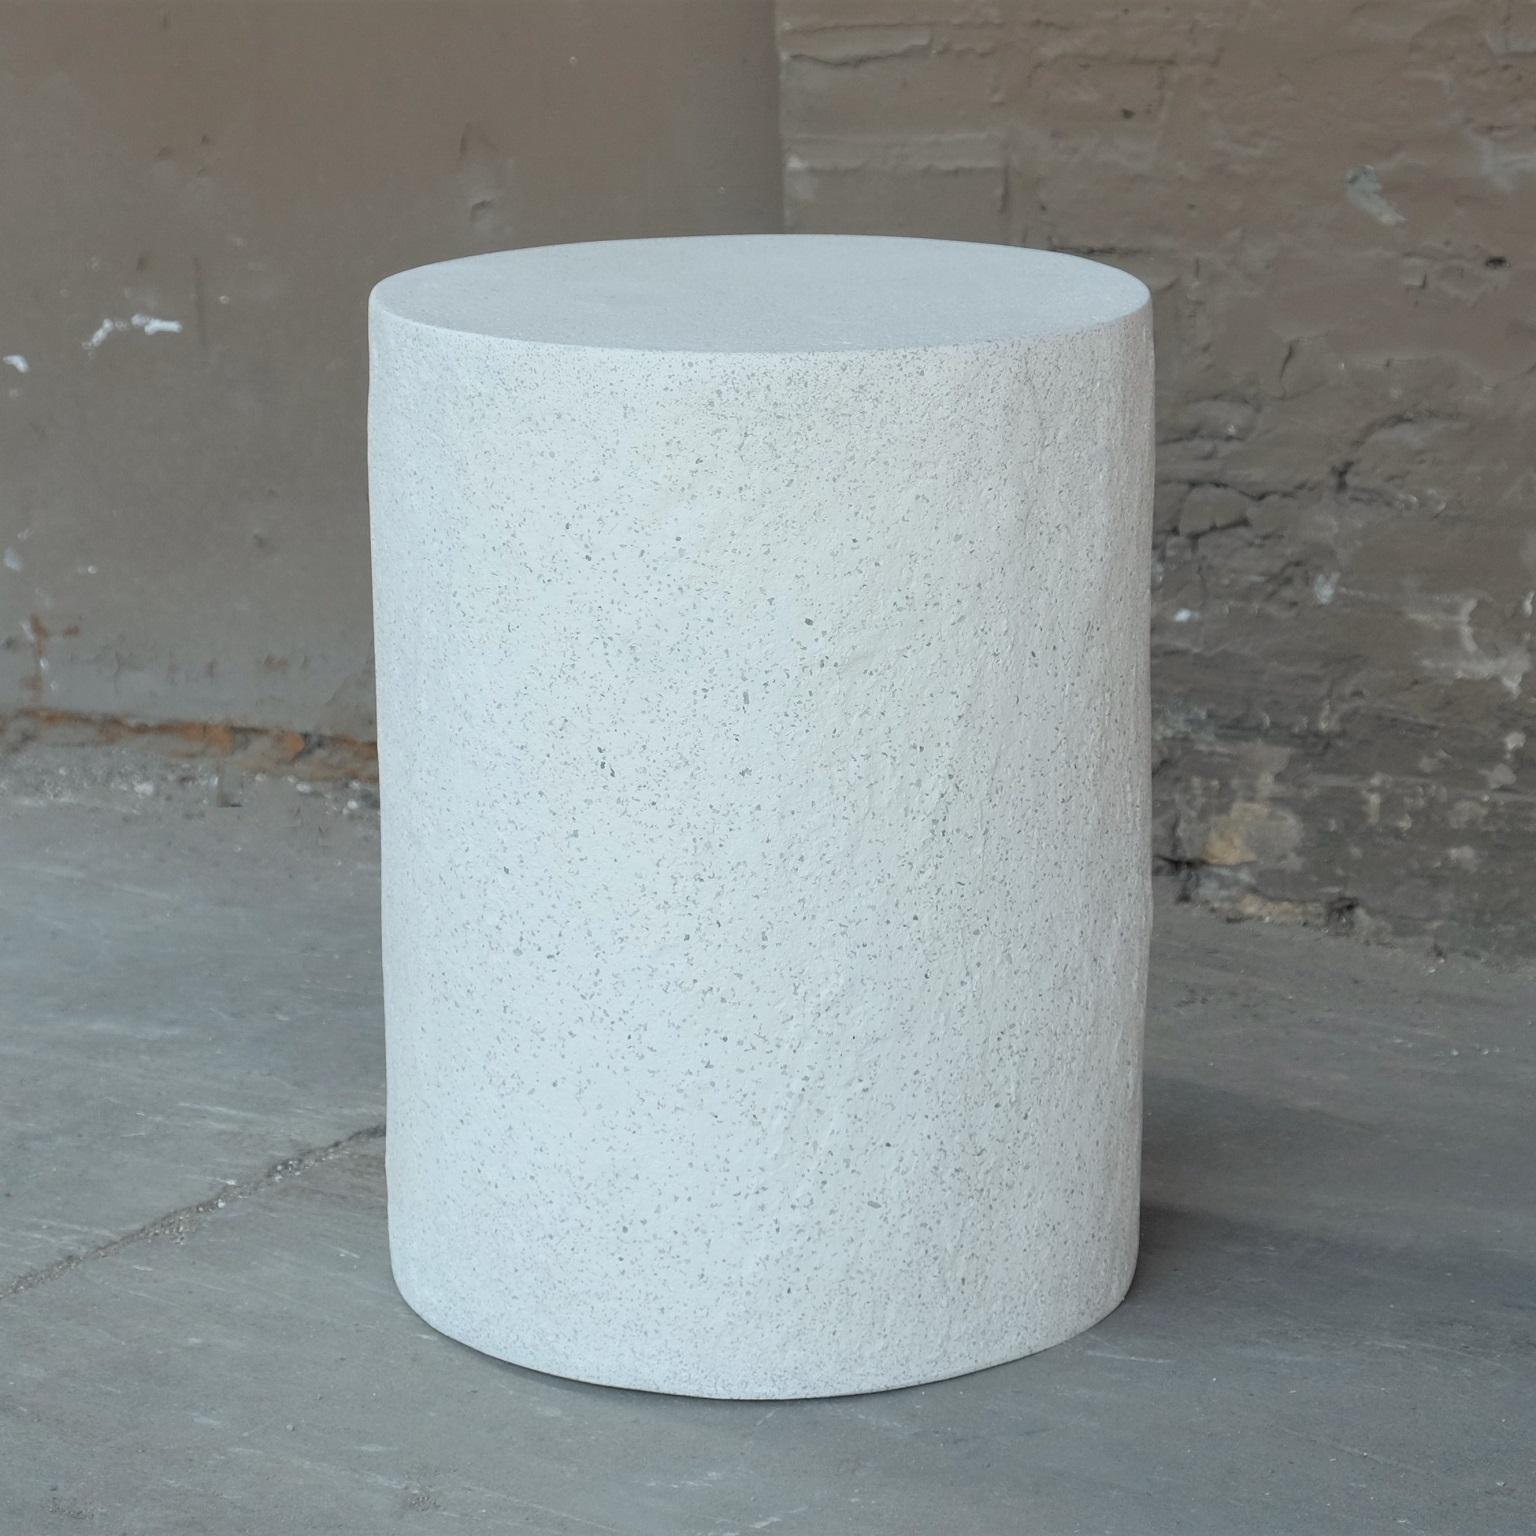 American Cast Resin 'Dock' Stool and Side Table, White Stone Finish by Zachary A. Design For Sale